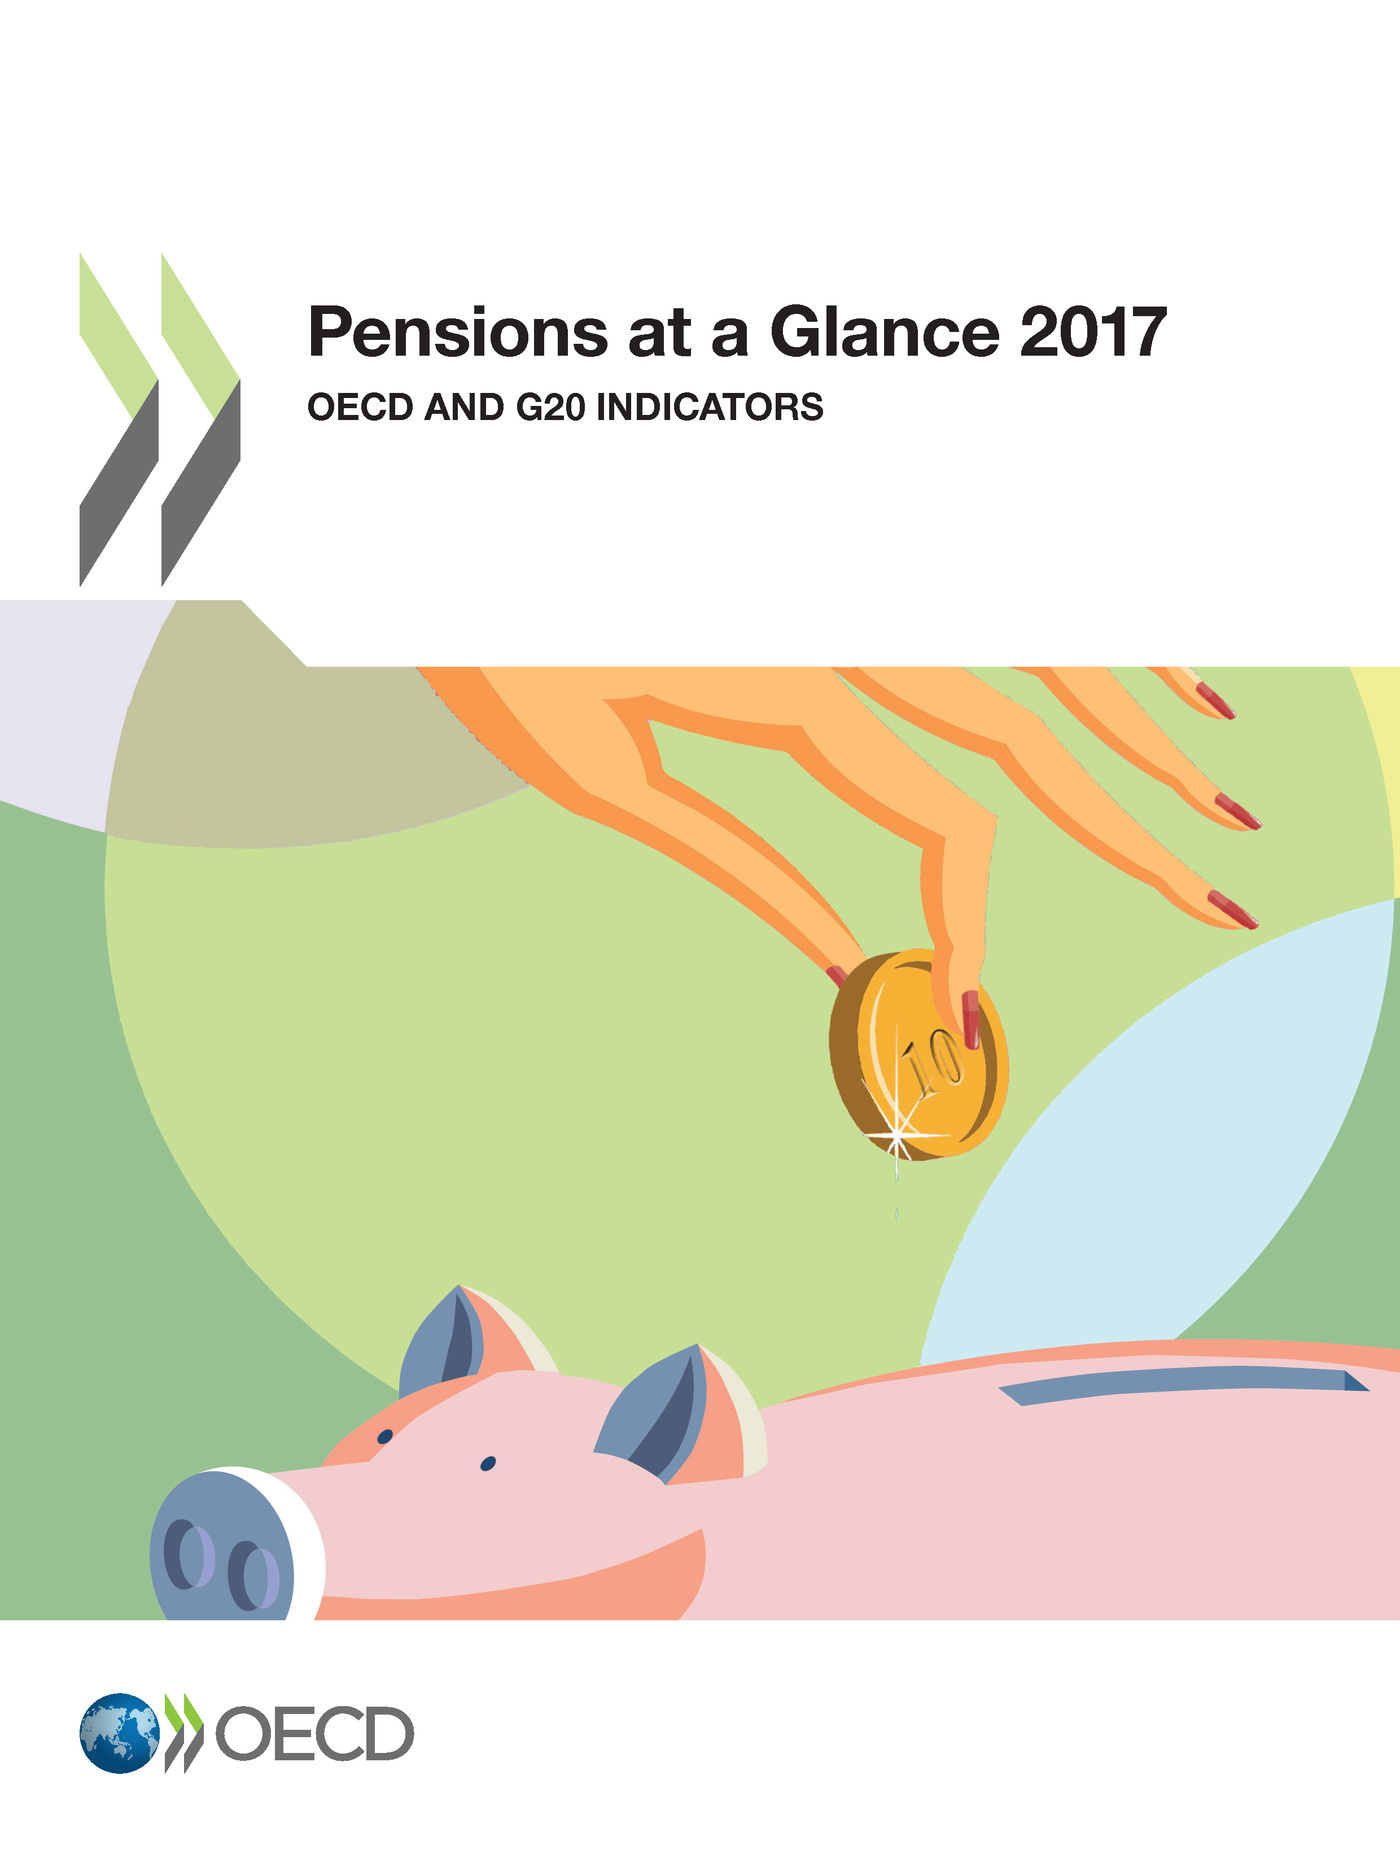 Pensions at a Glance 2017 -  Collectif - OCDE / OECD